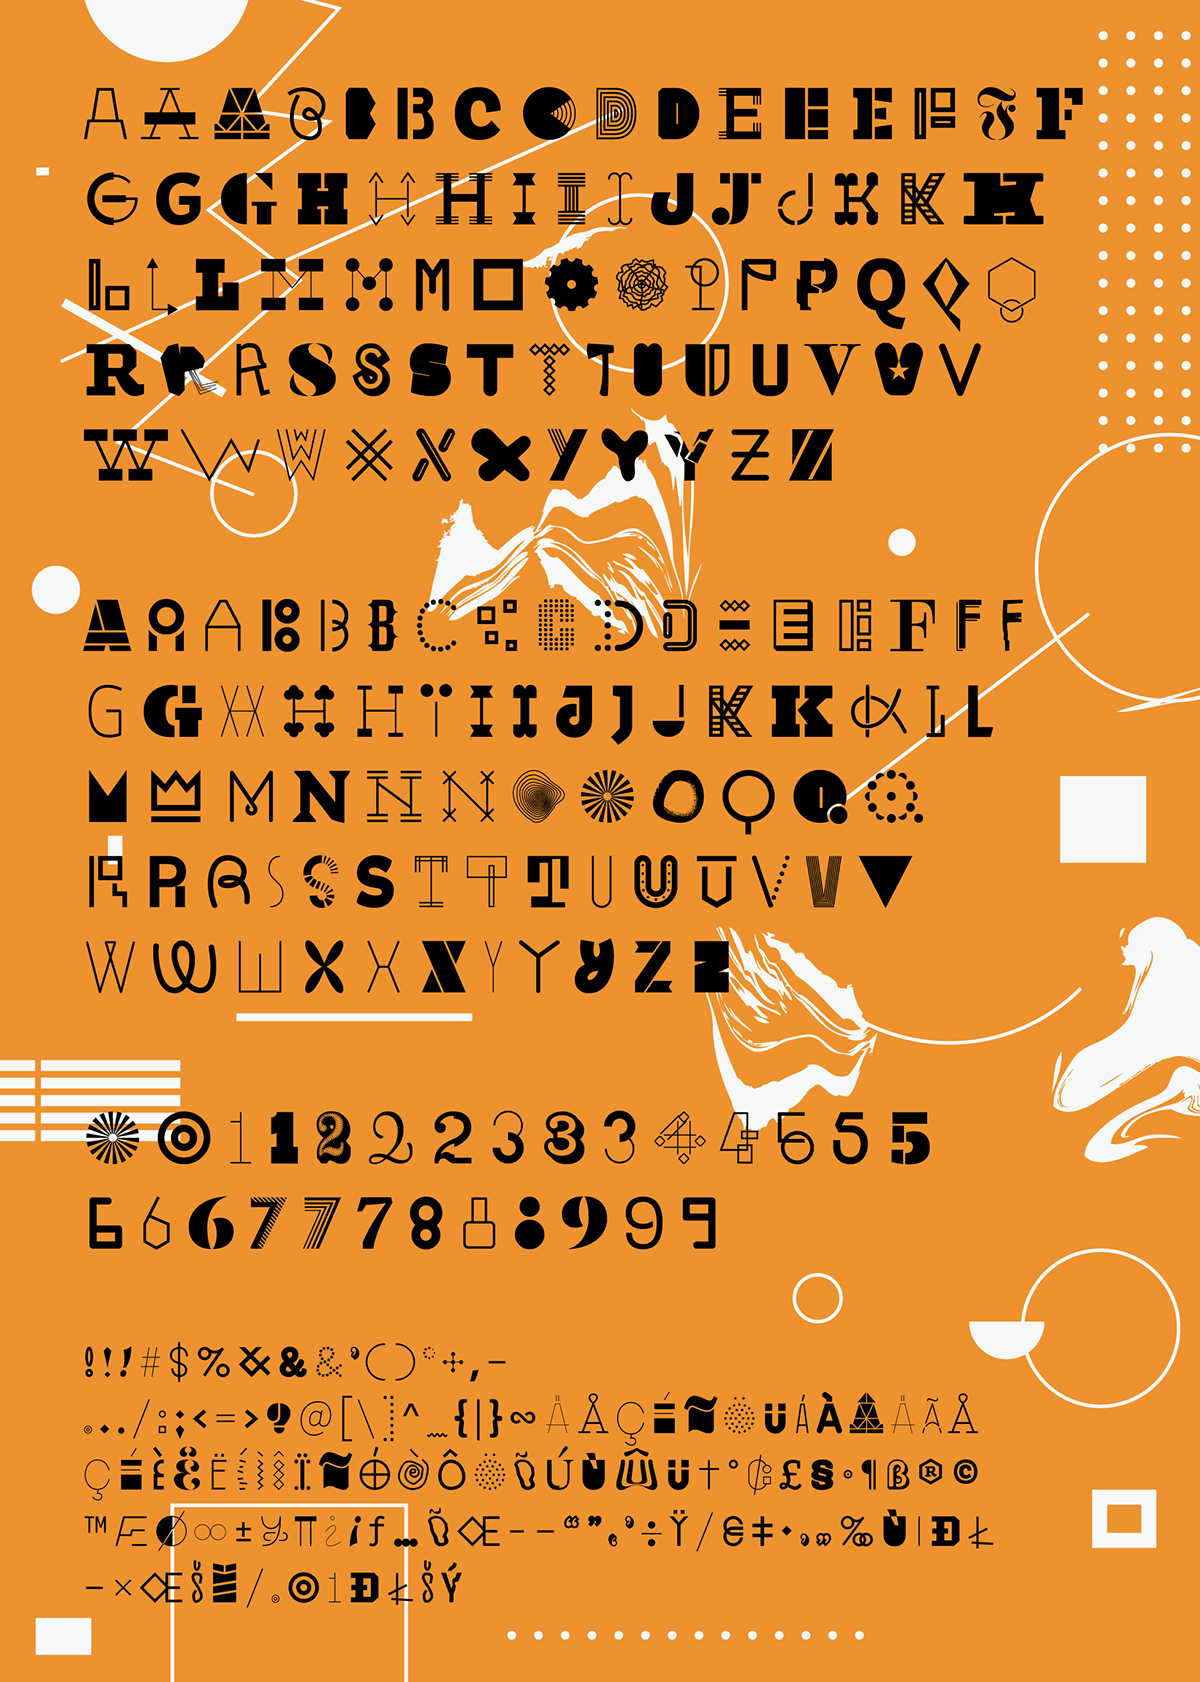 font Typometry type graphic design pattern letters glyphs FontLab characters random expressive